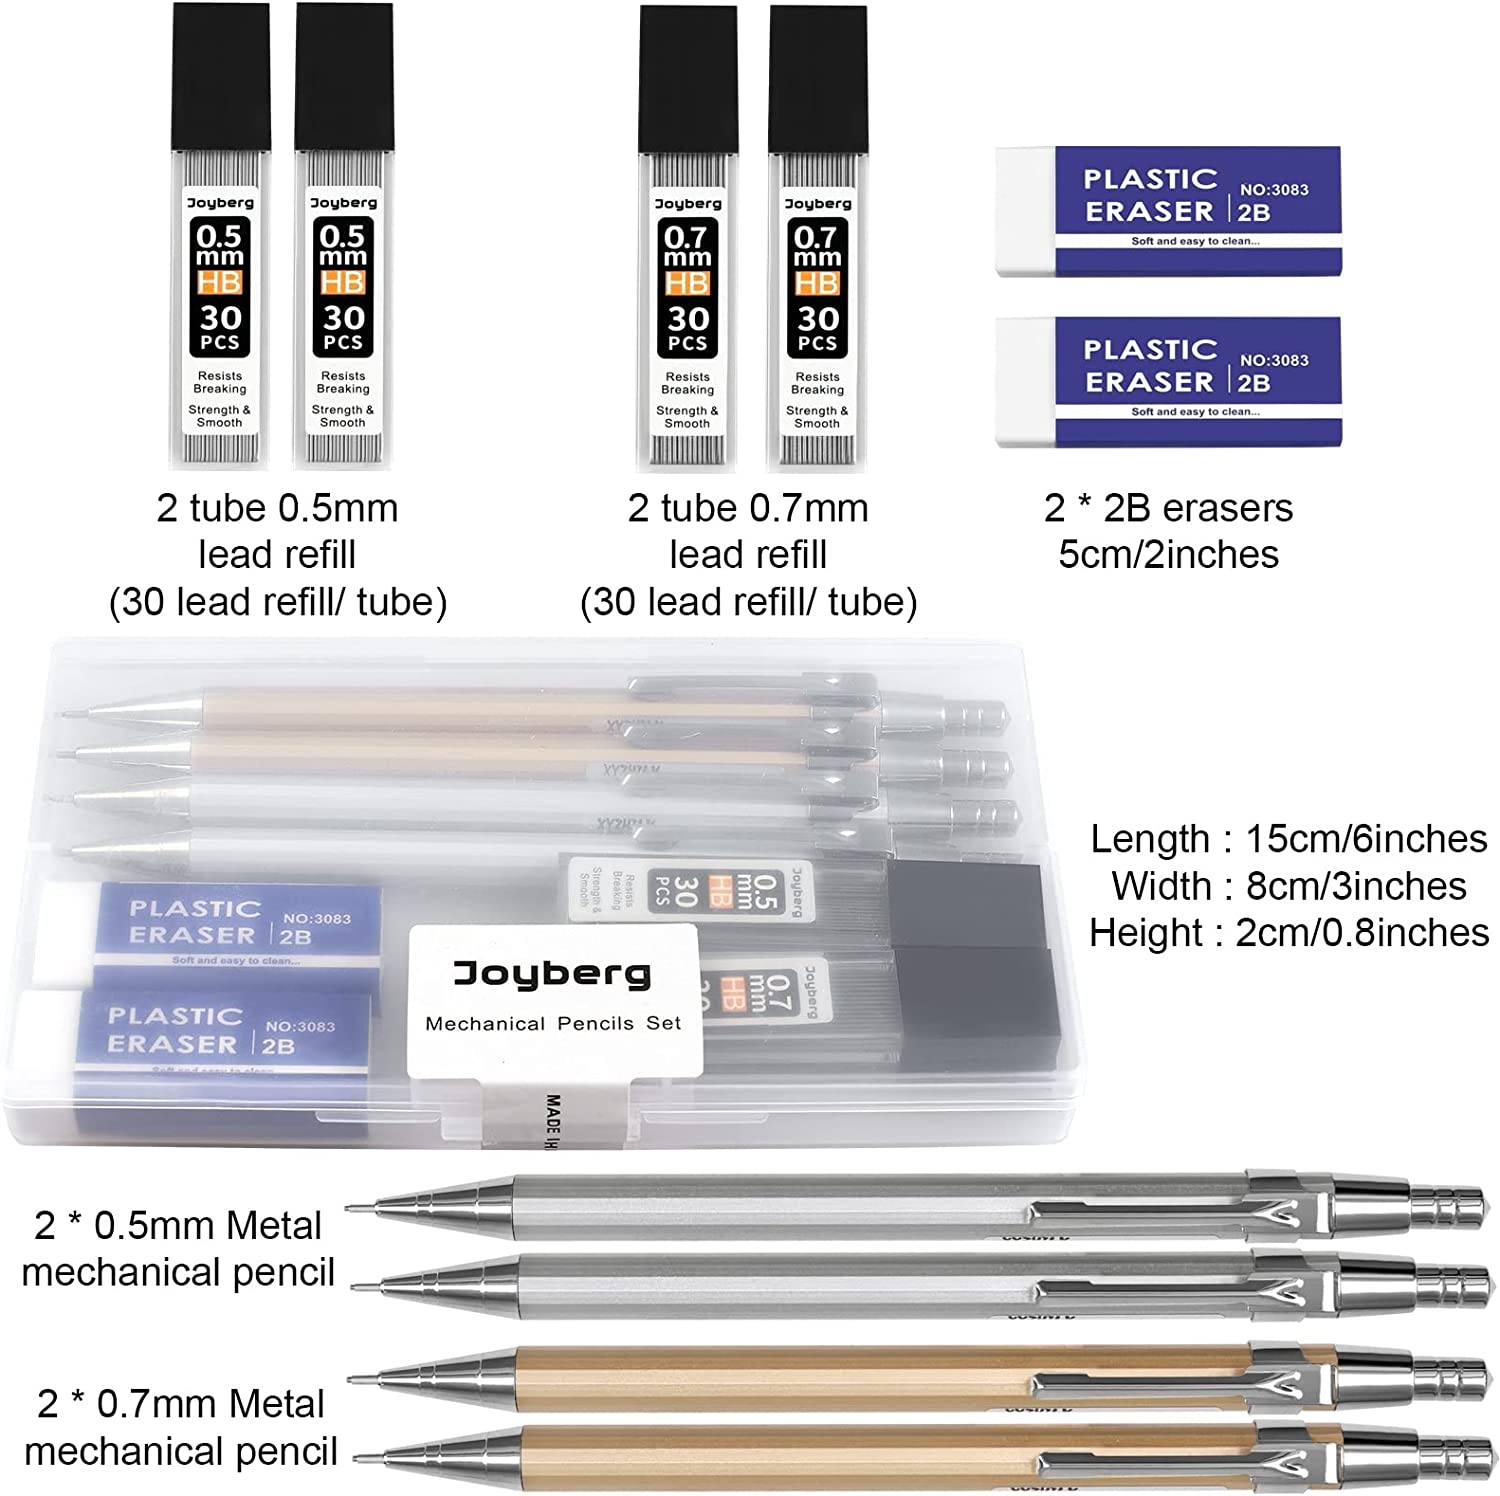 Joyberg 4 Pack Metal Mechanical 0.5mm, 0.7mm, Lead Pencil with 30 HB Lead  Refills 0.5 & 30 HB Lead Refills 0.7 & 2 Erasers, Drafting Pencil Set with  Case for Artist Writing, Drawing Sketching 